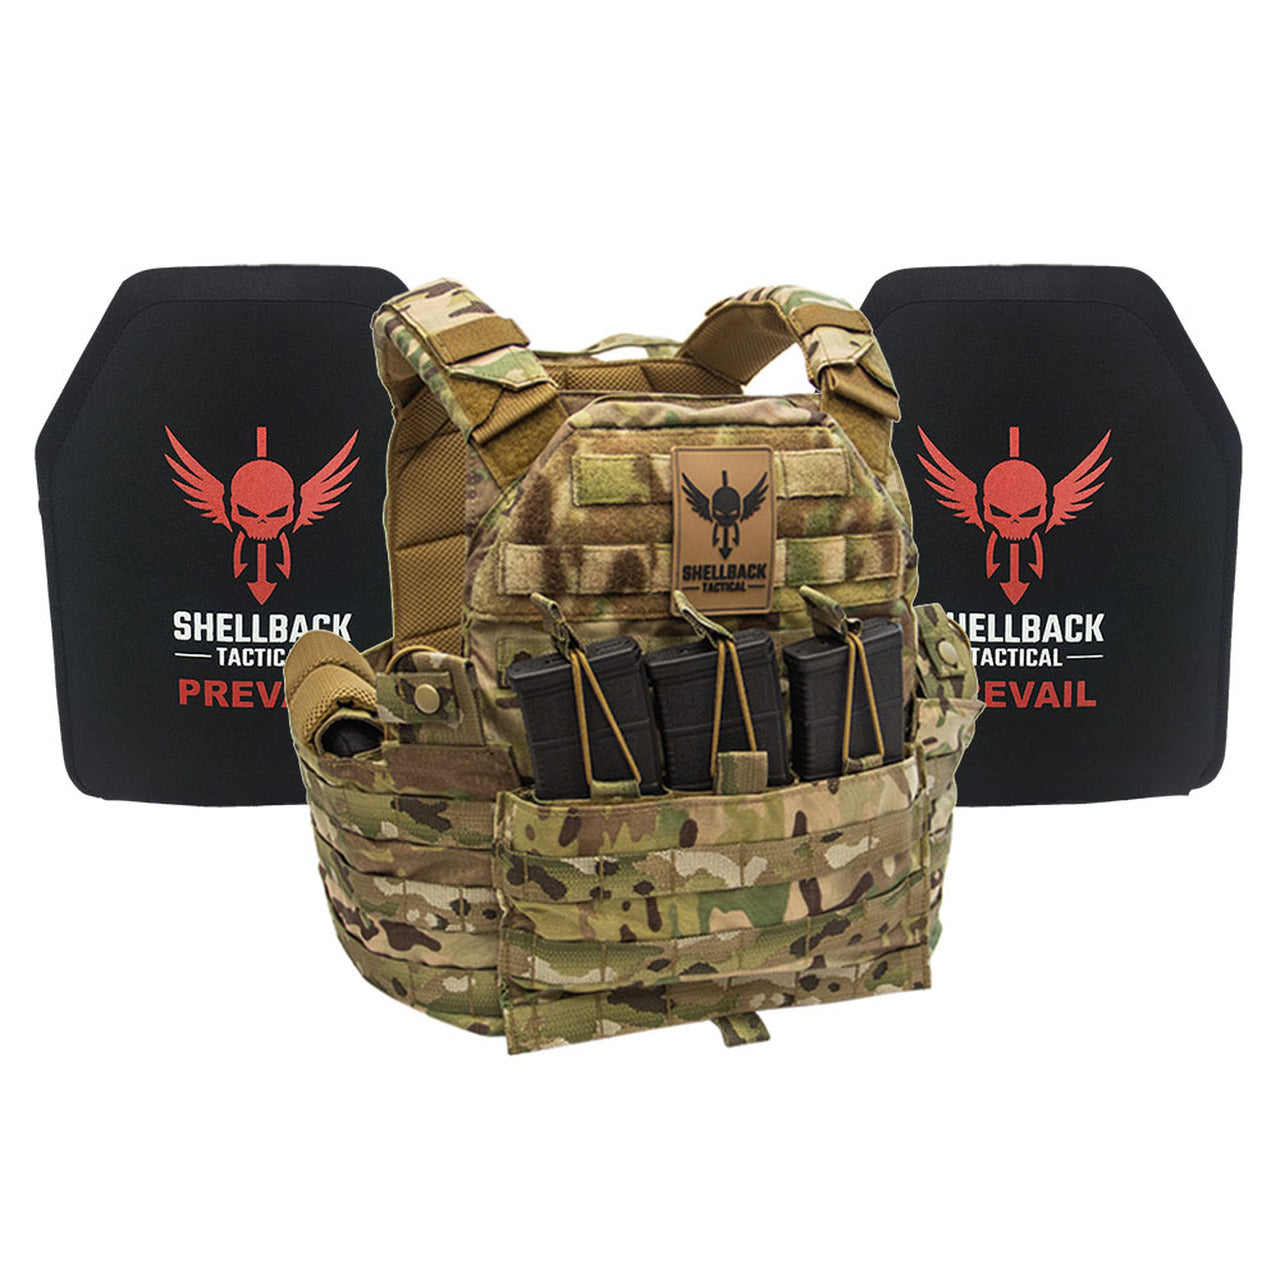 A Shellback Tactical SF Lightweight Armor System with Level III+ H3101 Plates plate carrier and a pair of Shellback Tactical bulletproof vests.